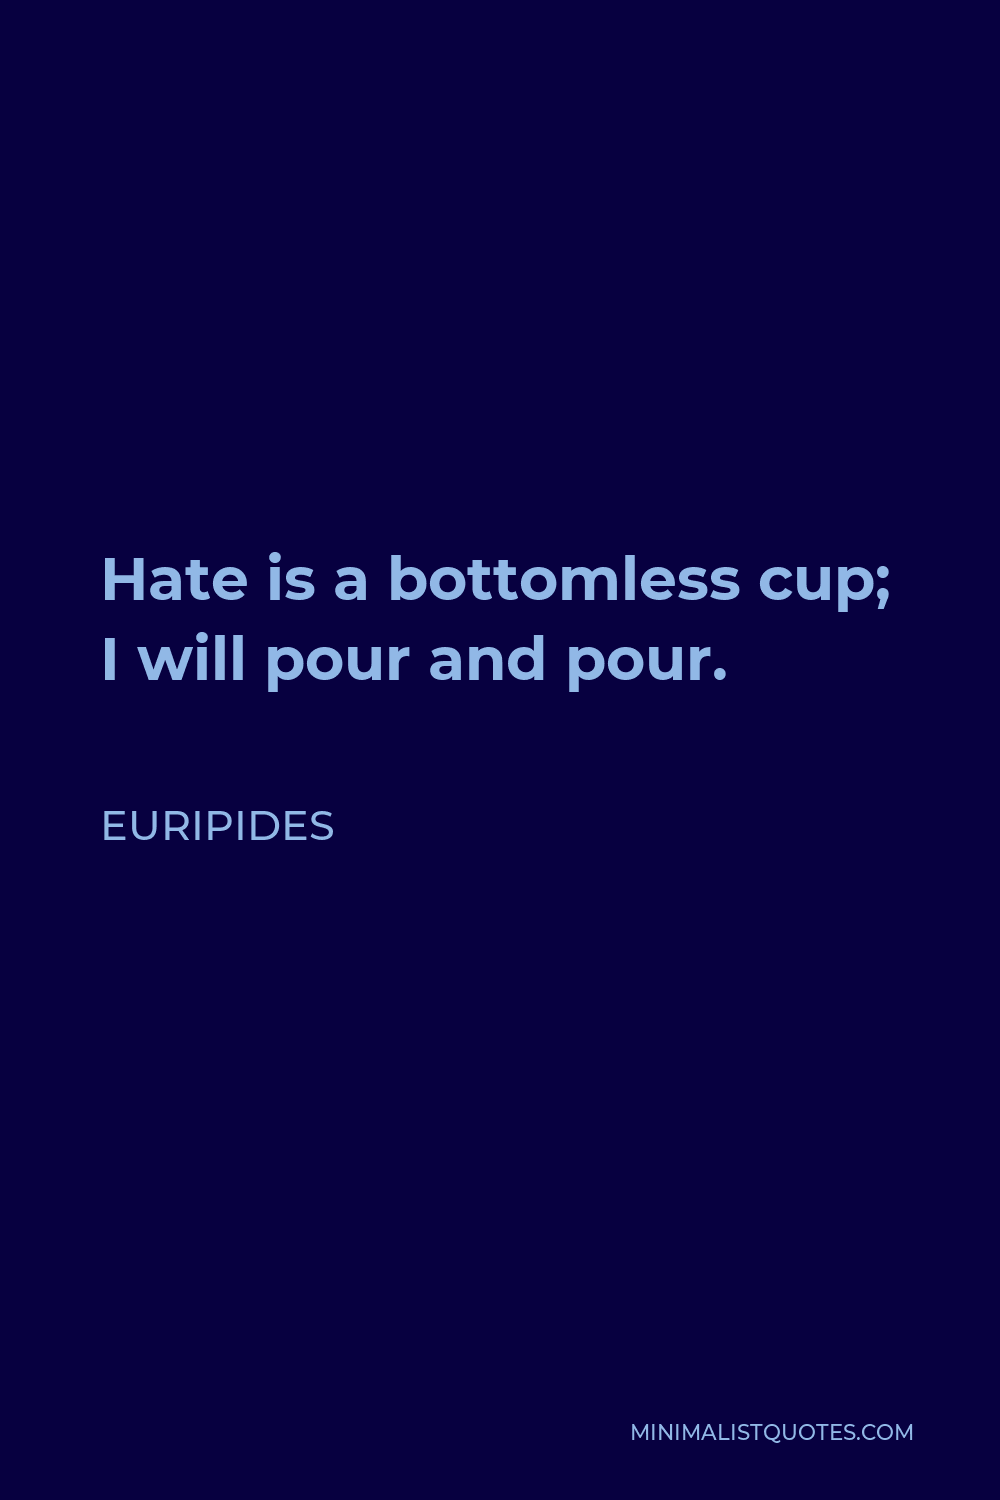 Euripides Quote - Hate is a bottomless cup; I will pour and pour.